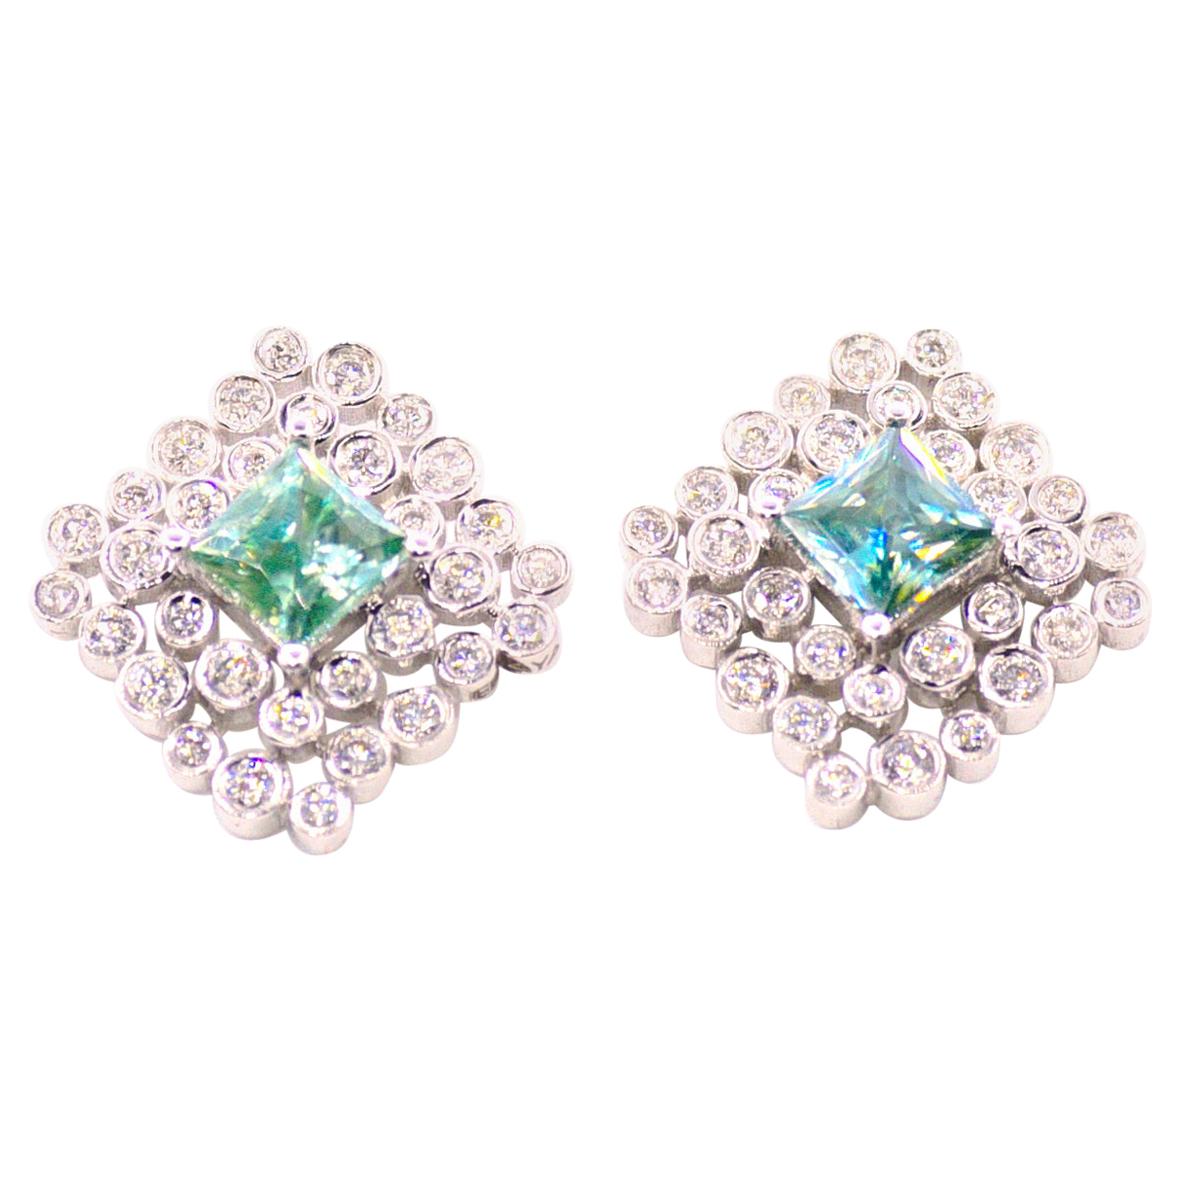 These dazzling 1.2CT diamond  Regal Diamond Earrings with timeless elegance will make you effortlessly chic and unique. 
Most of our jewels are made to order, so please allow us for a 2-4 week delivery.
Please note the possibility of natural